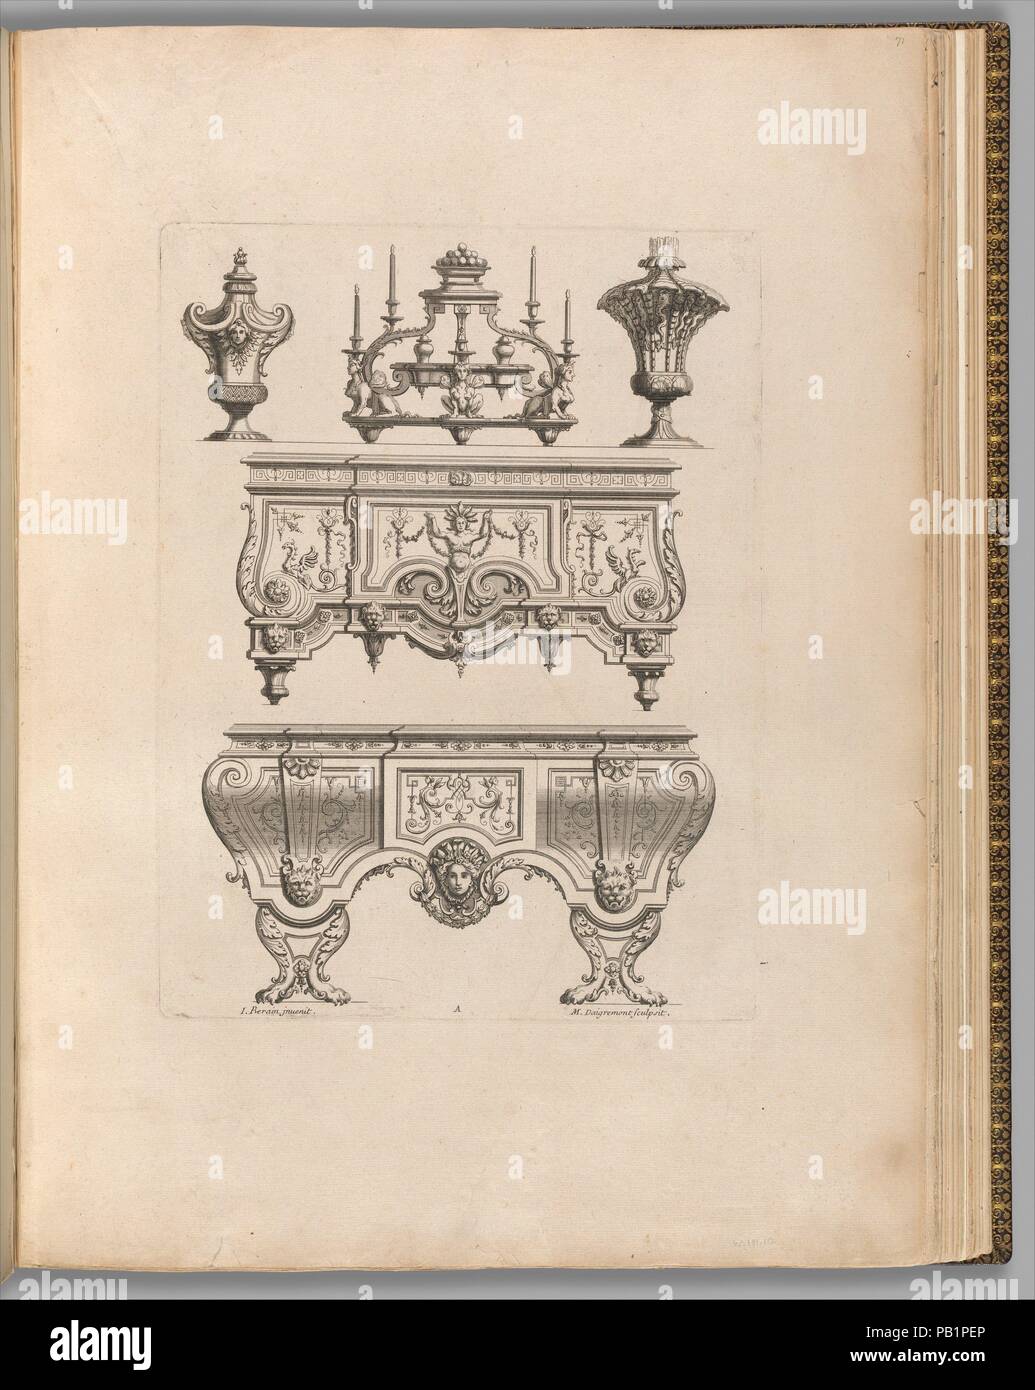 Plate from Ornament Designs Invented by J. Berain (page 71). Artist and publisher: Jean Berain (French, Saint-Mihiel 1640-1711 Paris). Dedicatee: Jules Hardouin Mansart (French, Paris 1646-1708 Marly). Dimensions: Overall: 20 5/16 x 16 x 1 3/4 in. (51.6 x 40.6 x 4.5 cm). Engraver: M. Daigremont (French, active ca.1670-1700). Publisher: Thuret. Date: late 17th-early 18th century.  Berain's work was very influential and was adopted for the decoration of Boulle marquetry, tapestries, and other textiles, as well as faience. Berain, who was named chief designer to the French court in 1690, was give Stock Photo